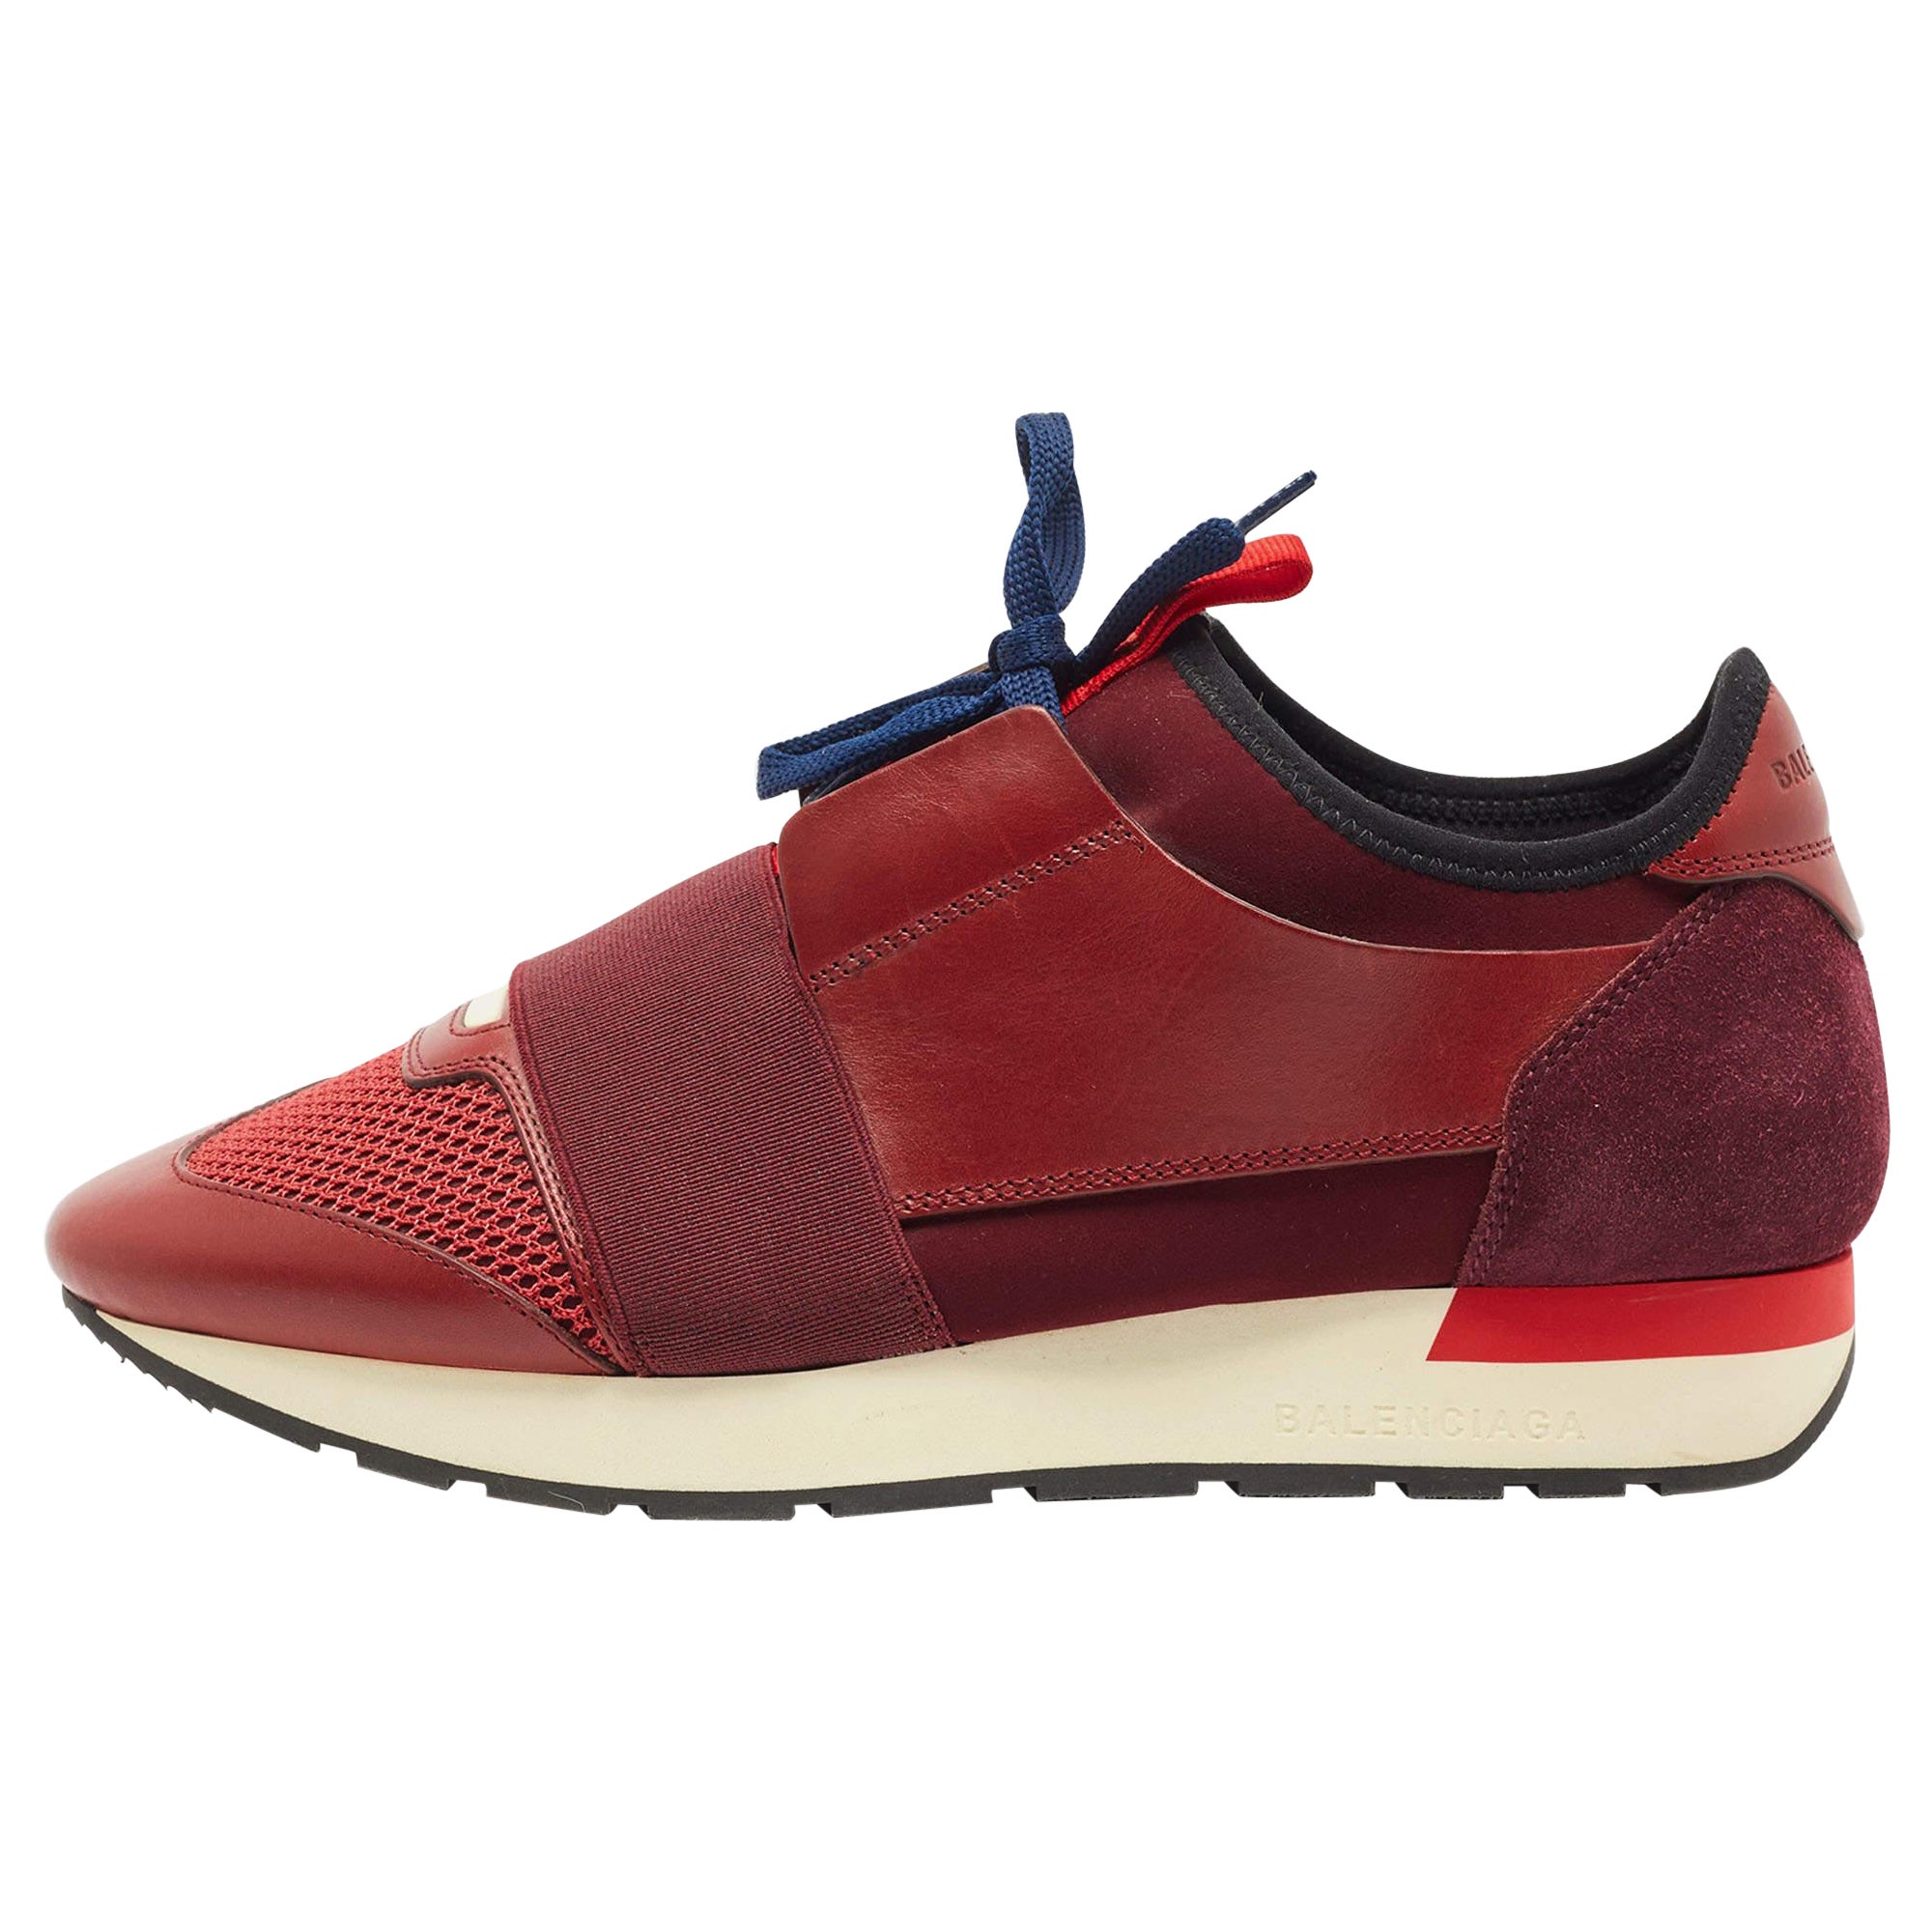 Balenciaga Burgundy Leather and Mesh Race Runner Sneakers Size 38 For Sale